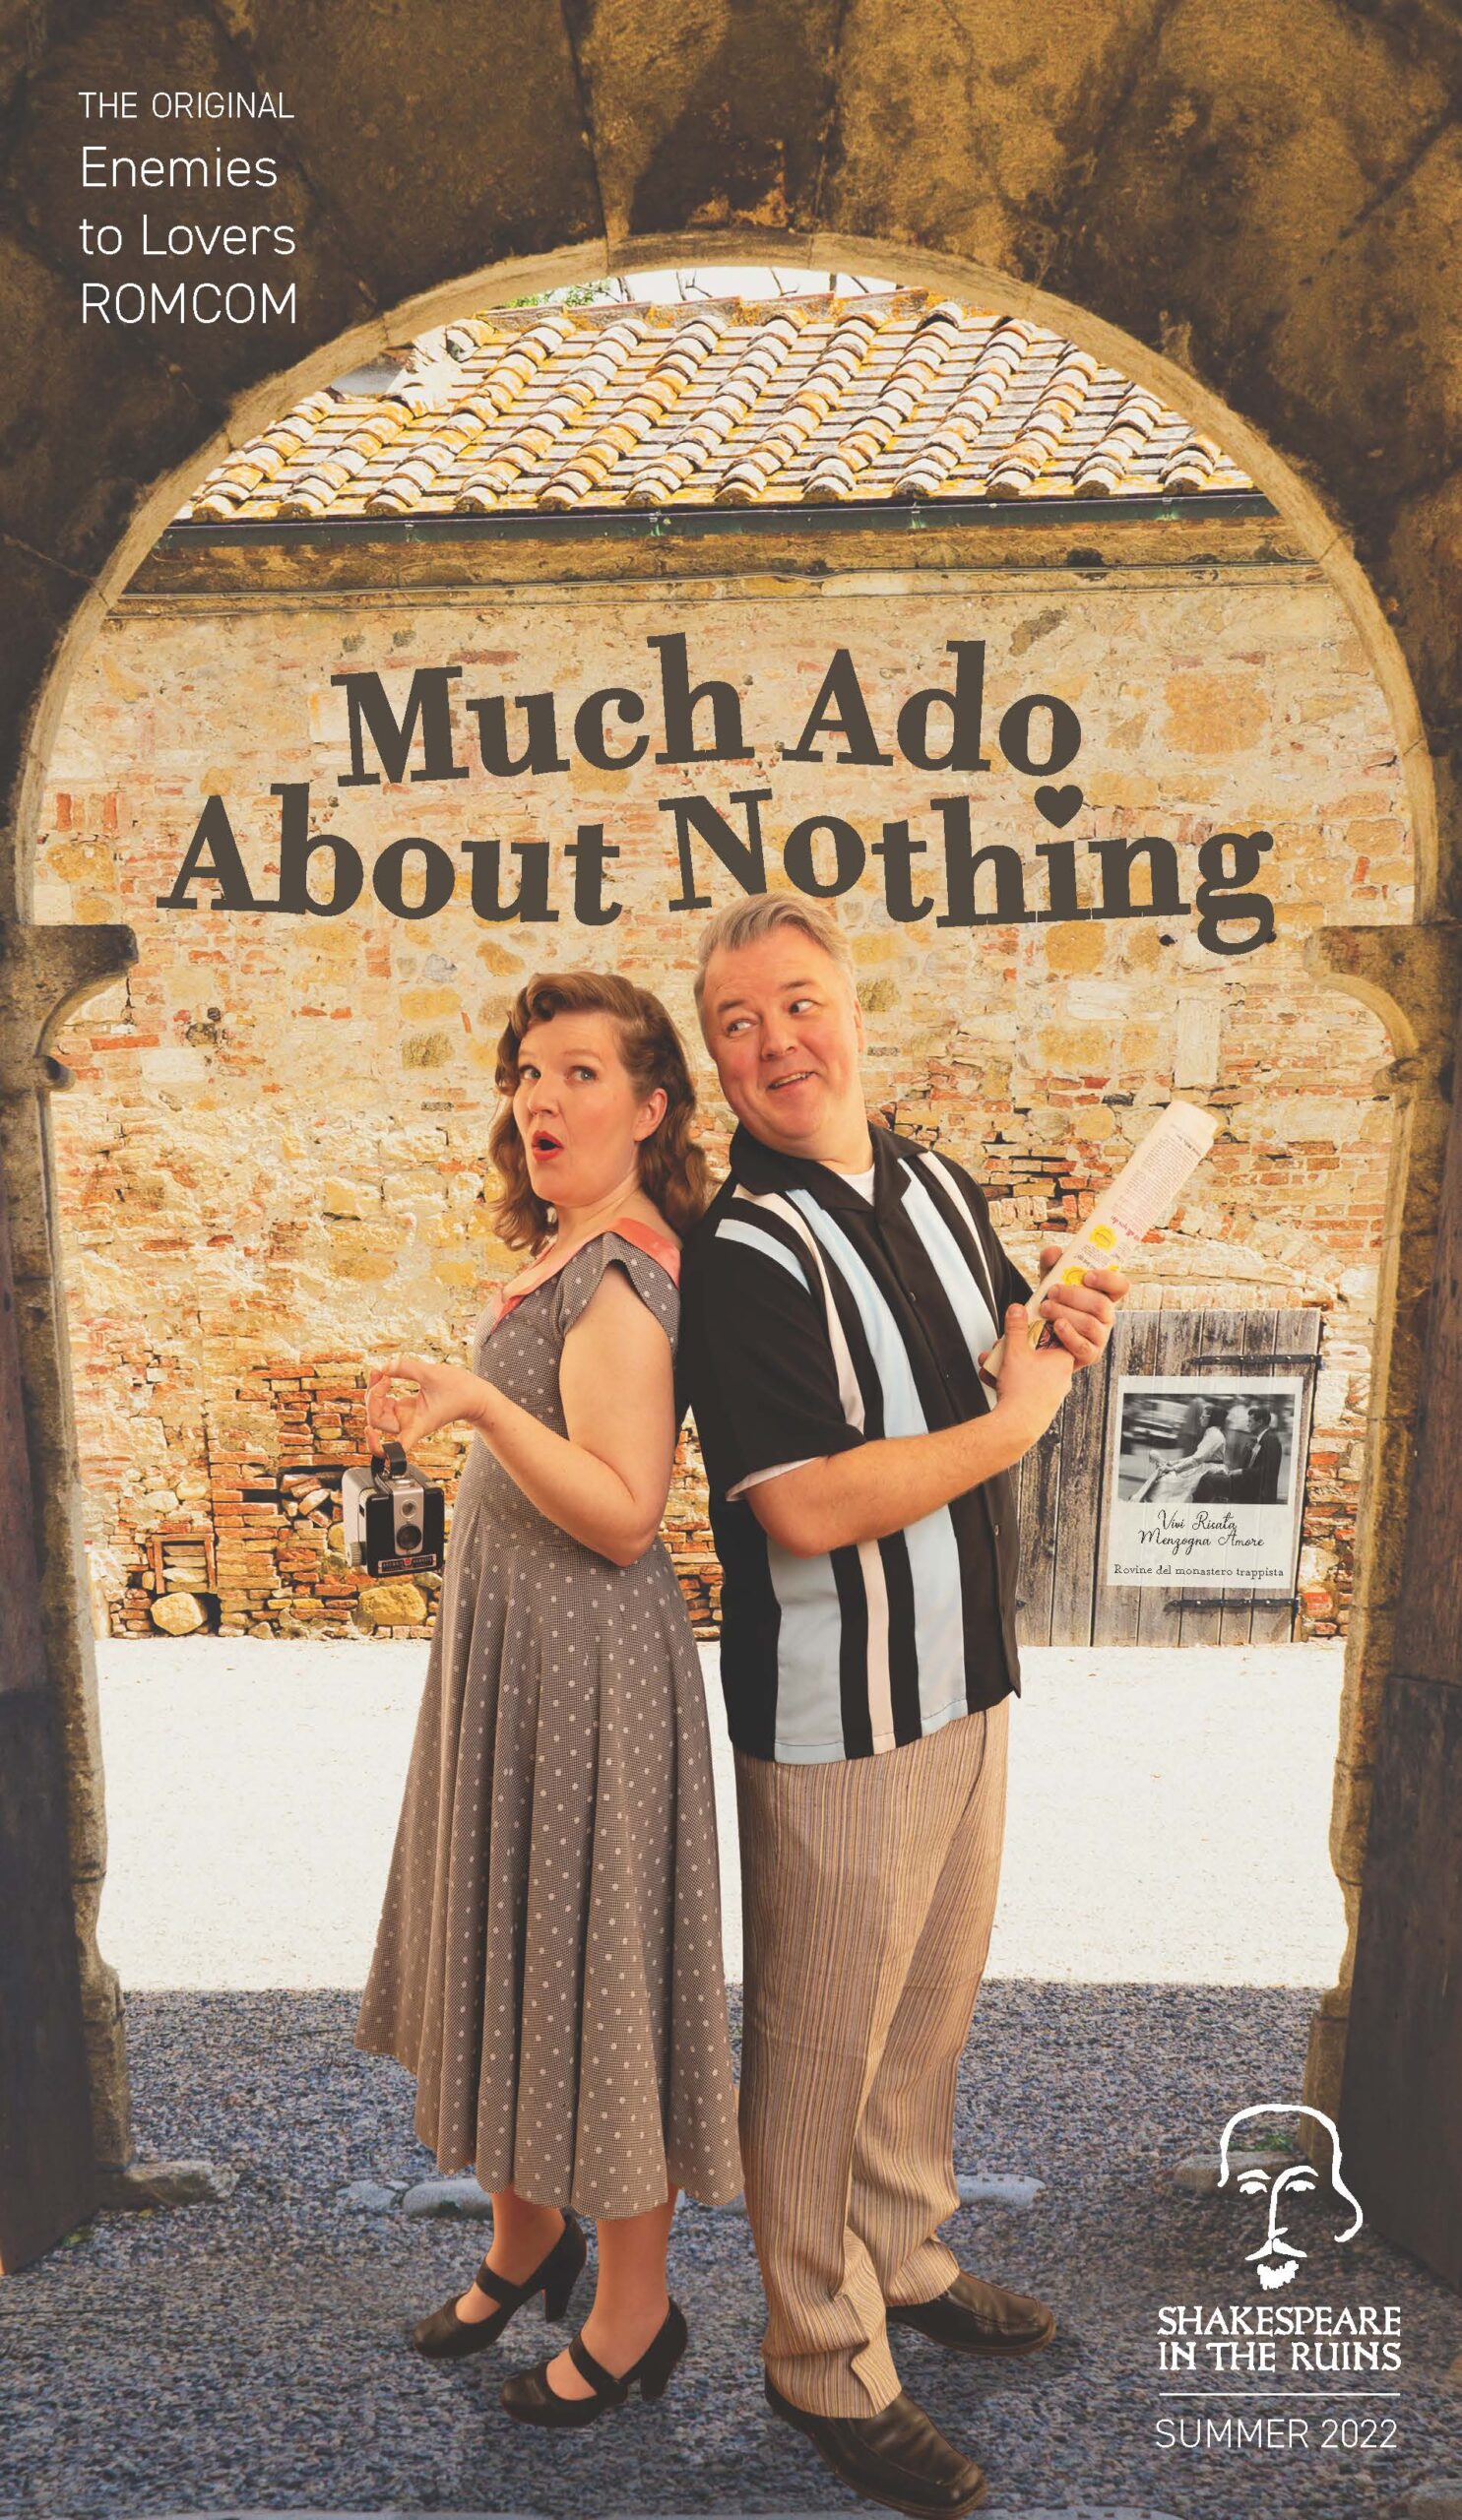 Beatrice and Benedick fight not to fall in love in Much Ado About Nothing